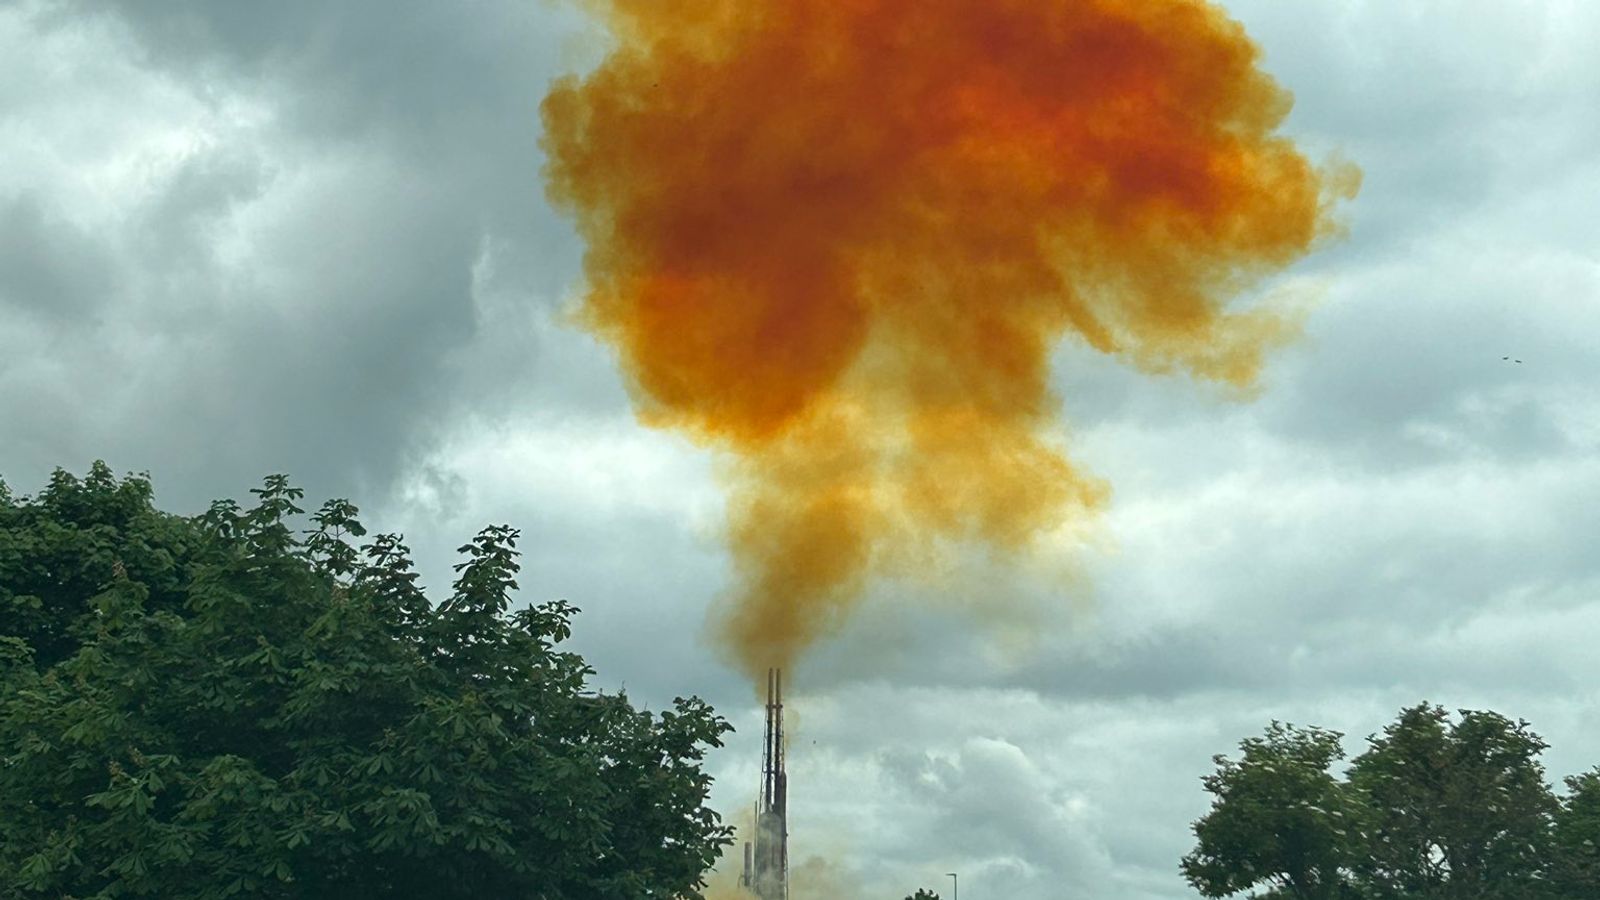 Orange cloud appears above County Durham after 'industrial incident'